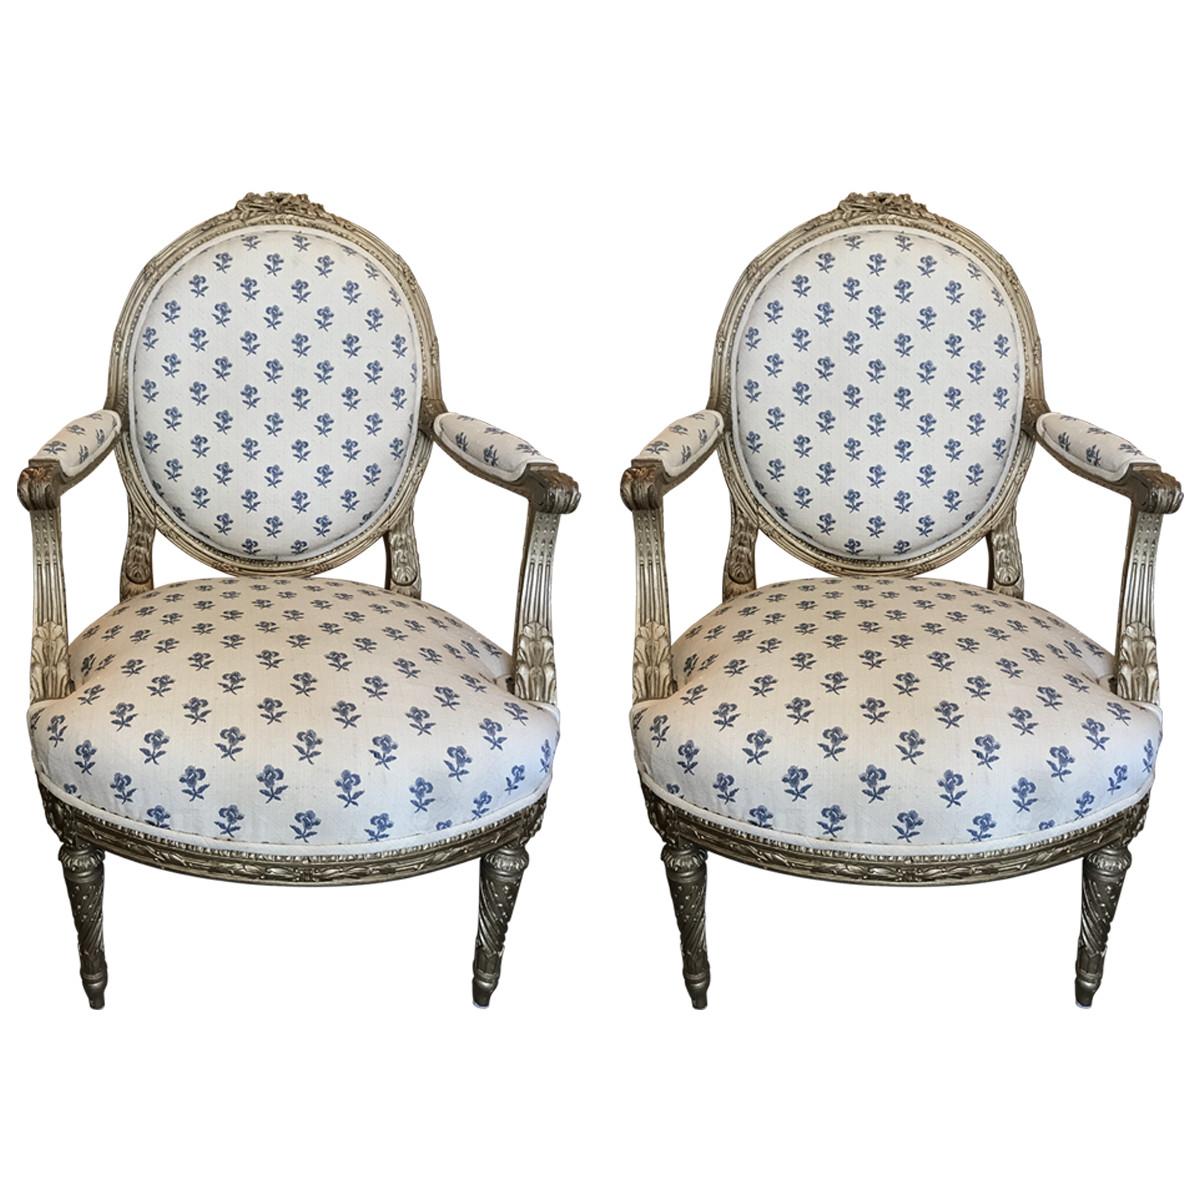 Pair of 19th Century French Louis XVI Style Giltwood Fauteuil